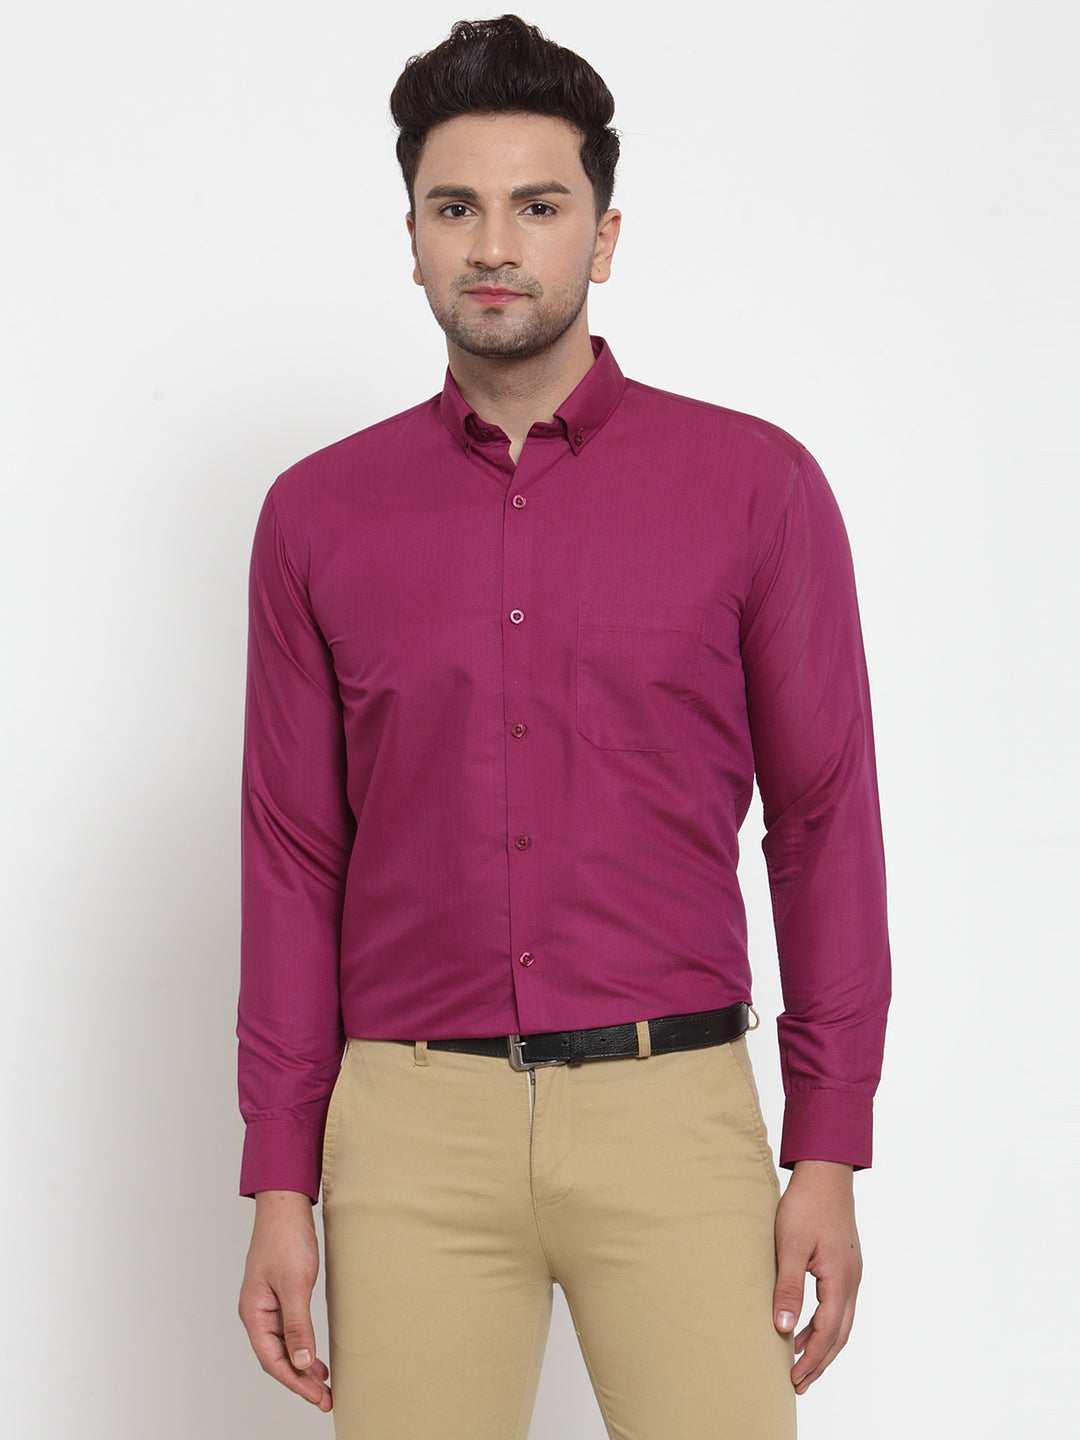 Men's Red Cotton Solid Button Down Formal Shirts ( SF 713Magenta ) - Jainish